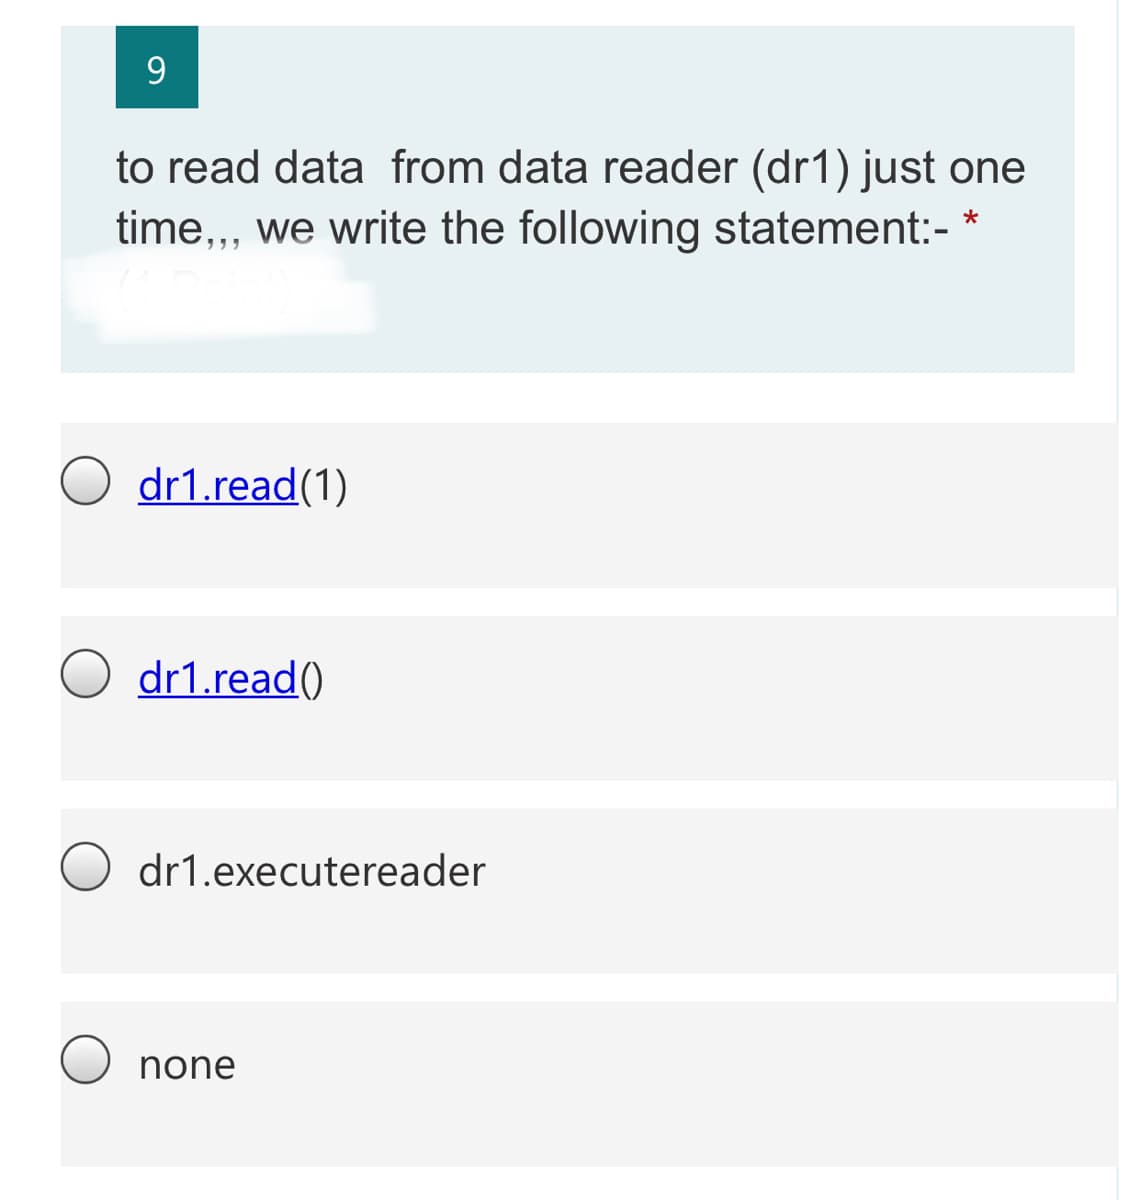 9.
to read data from data reader (dr1) just one
time,, we write the following statement:-
dr1.read(1)
dr1.read()
dr1.executereader
none
